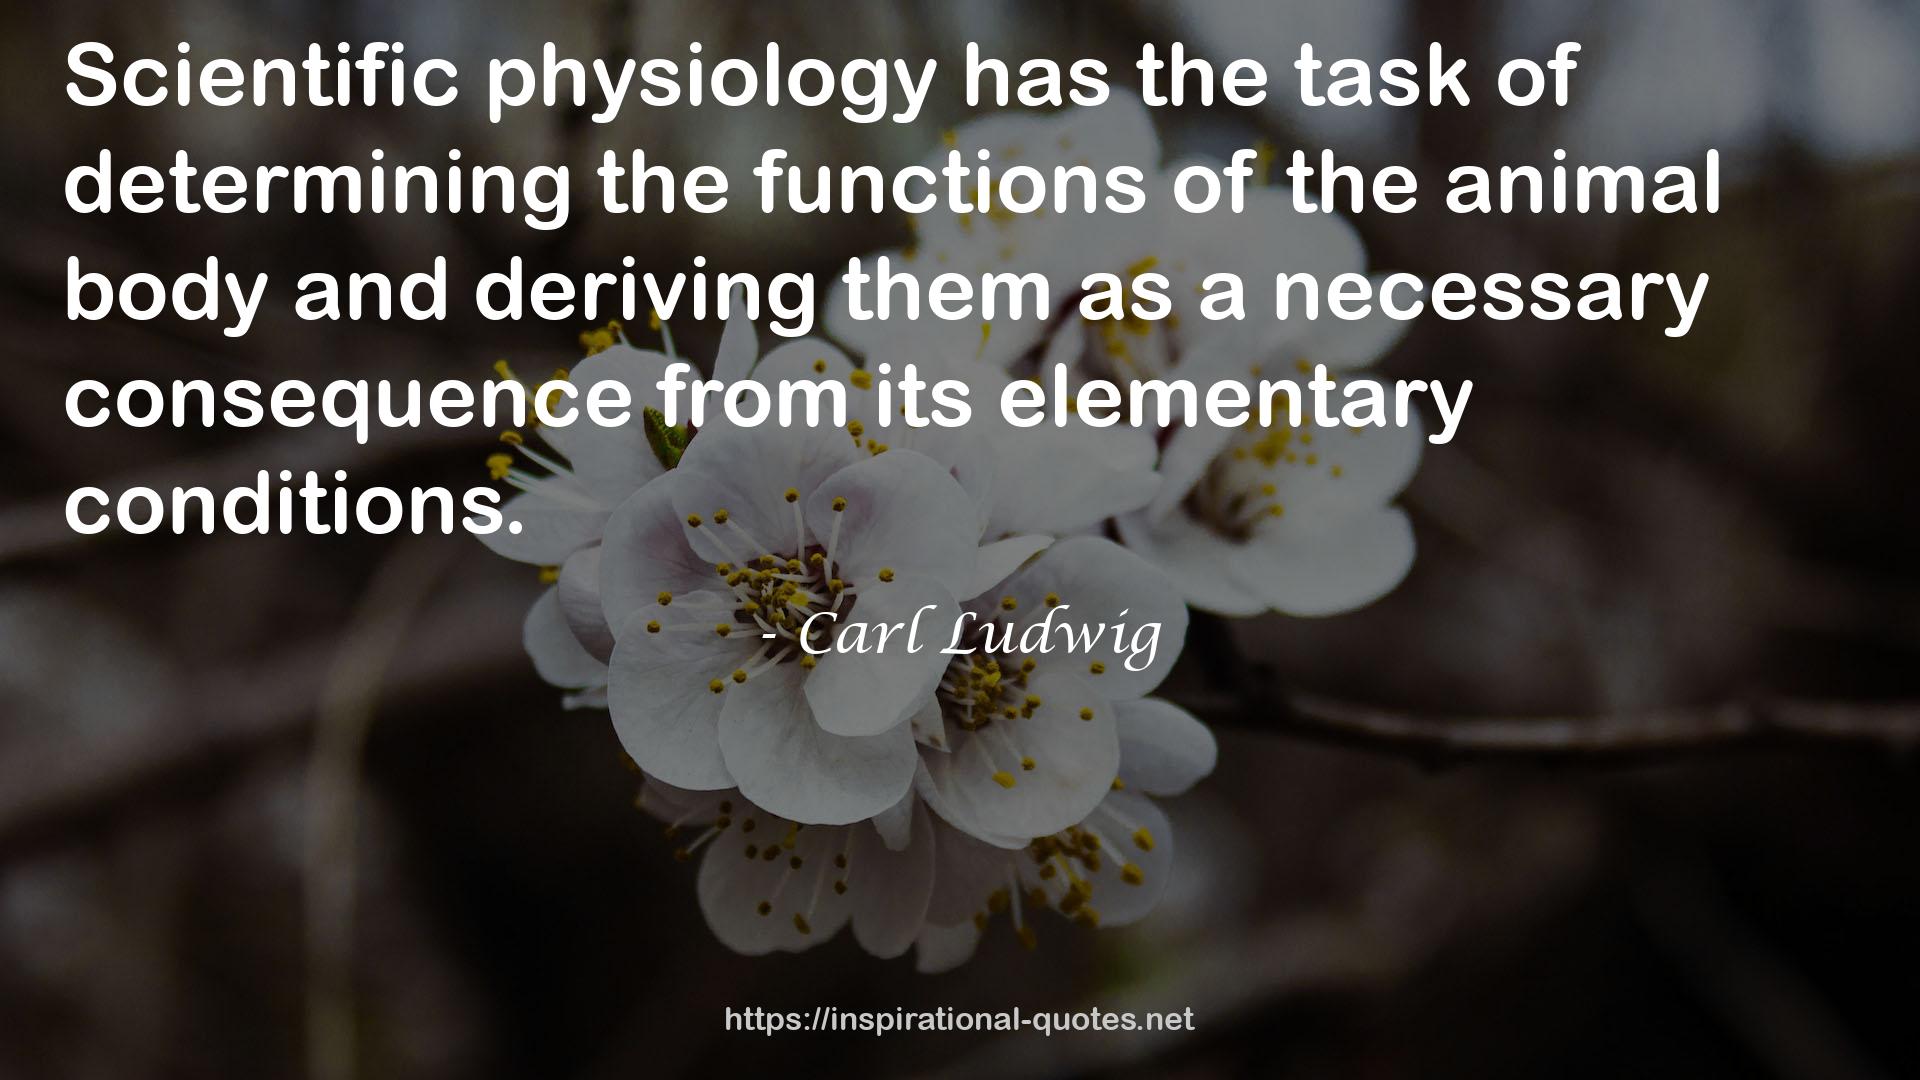 Carl Ludwig QUOTES